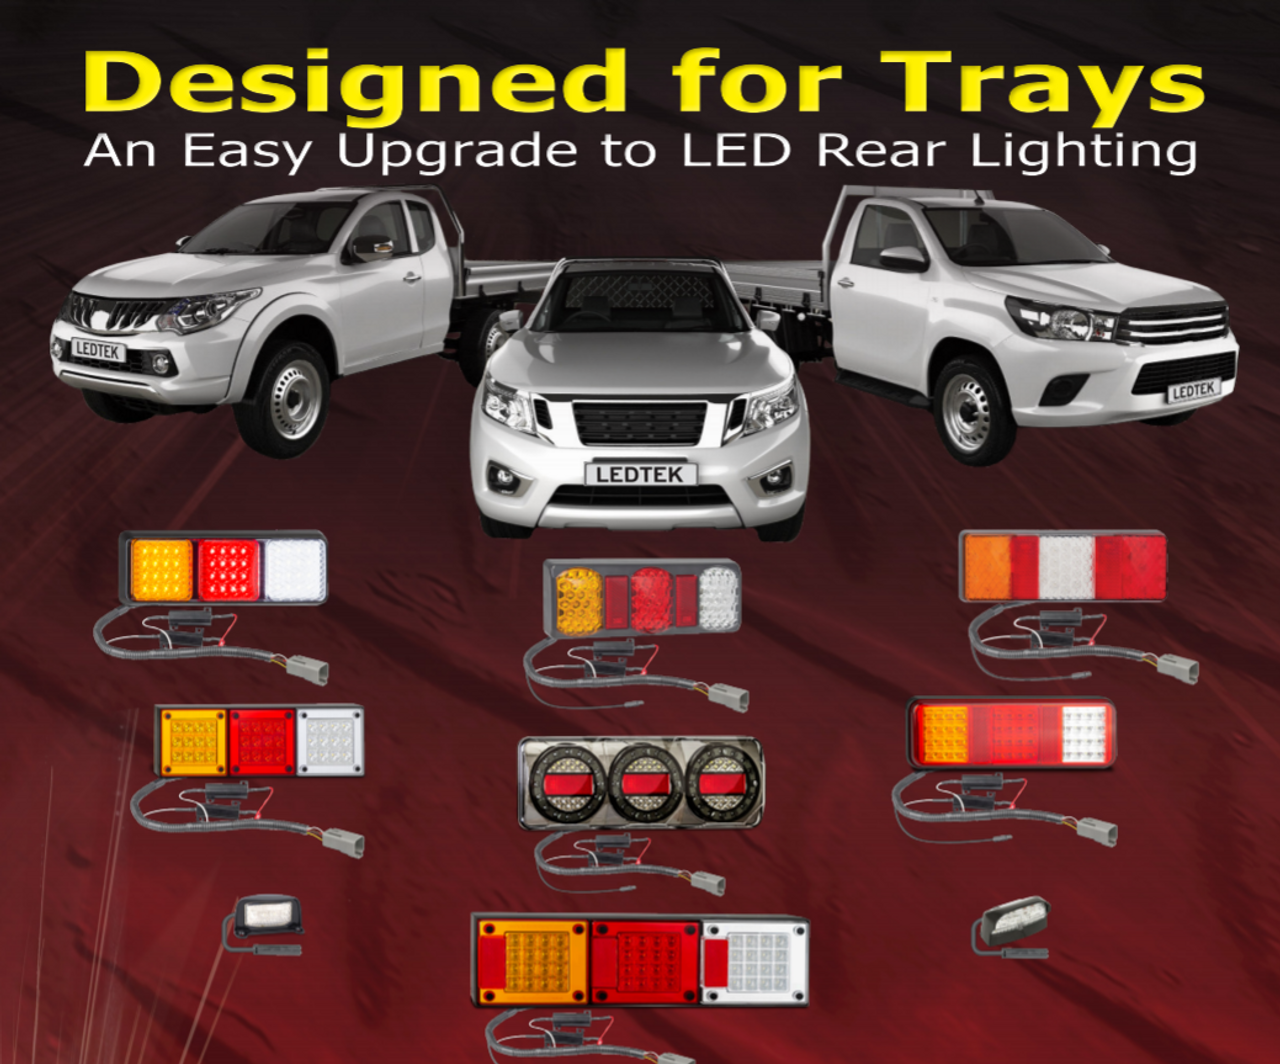 SO283ARW2LR12+PATCHHILUX - Hilux LED Patch Cable System. Plug and Play. LED Upgrade. Designed for Trays. 283 Series Light. Stop, Tail, Indicator and Reverse. 12v Only. Lamp with Conversion Cable. Application to Suit Toyota Hilux. Autolamp. Ultimate LED. 